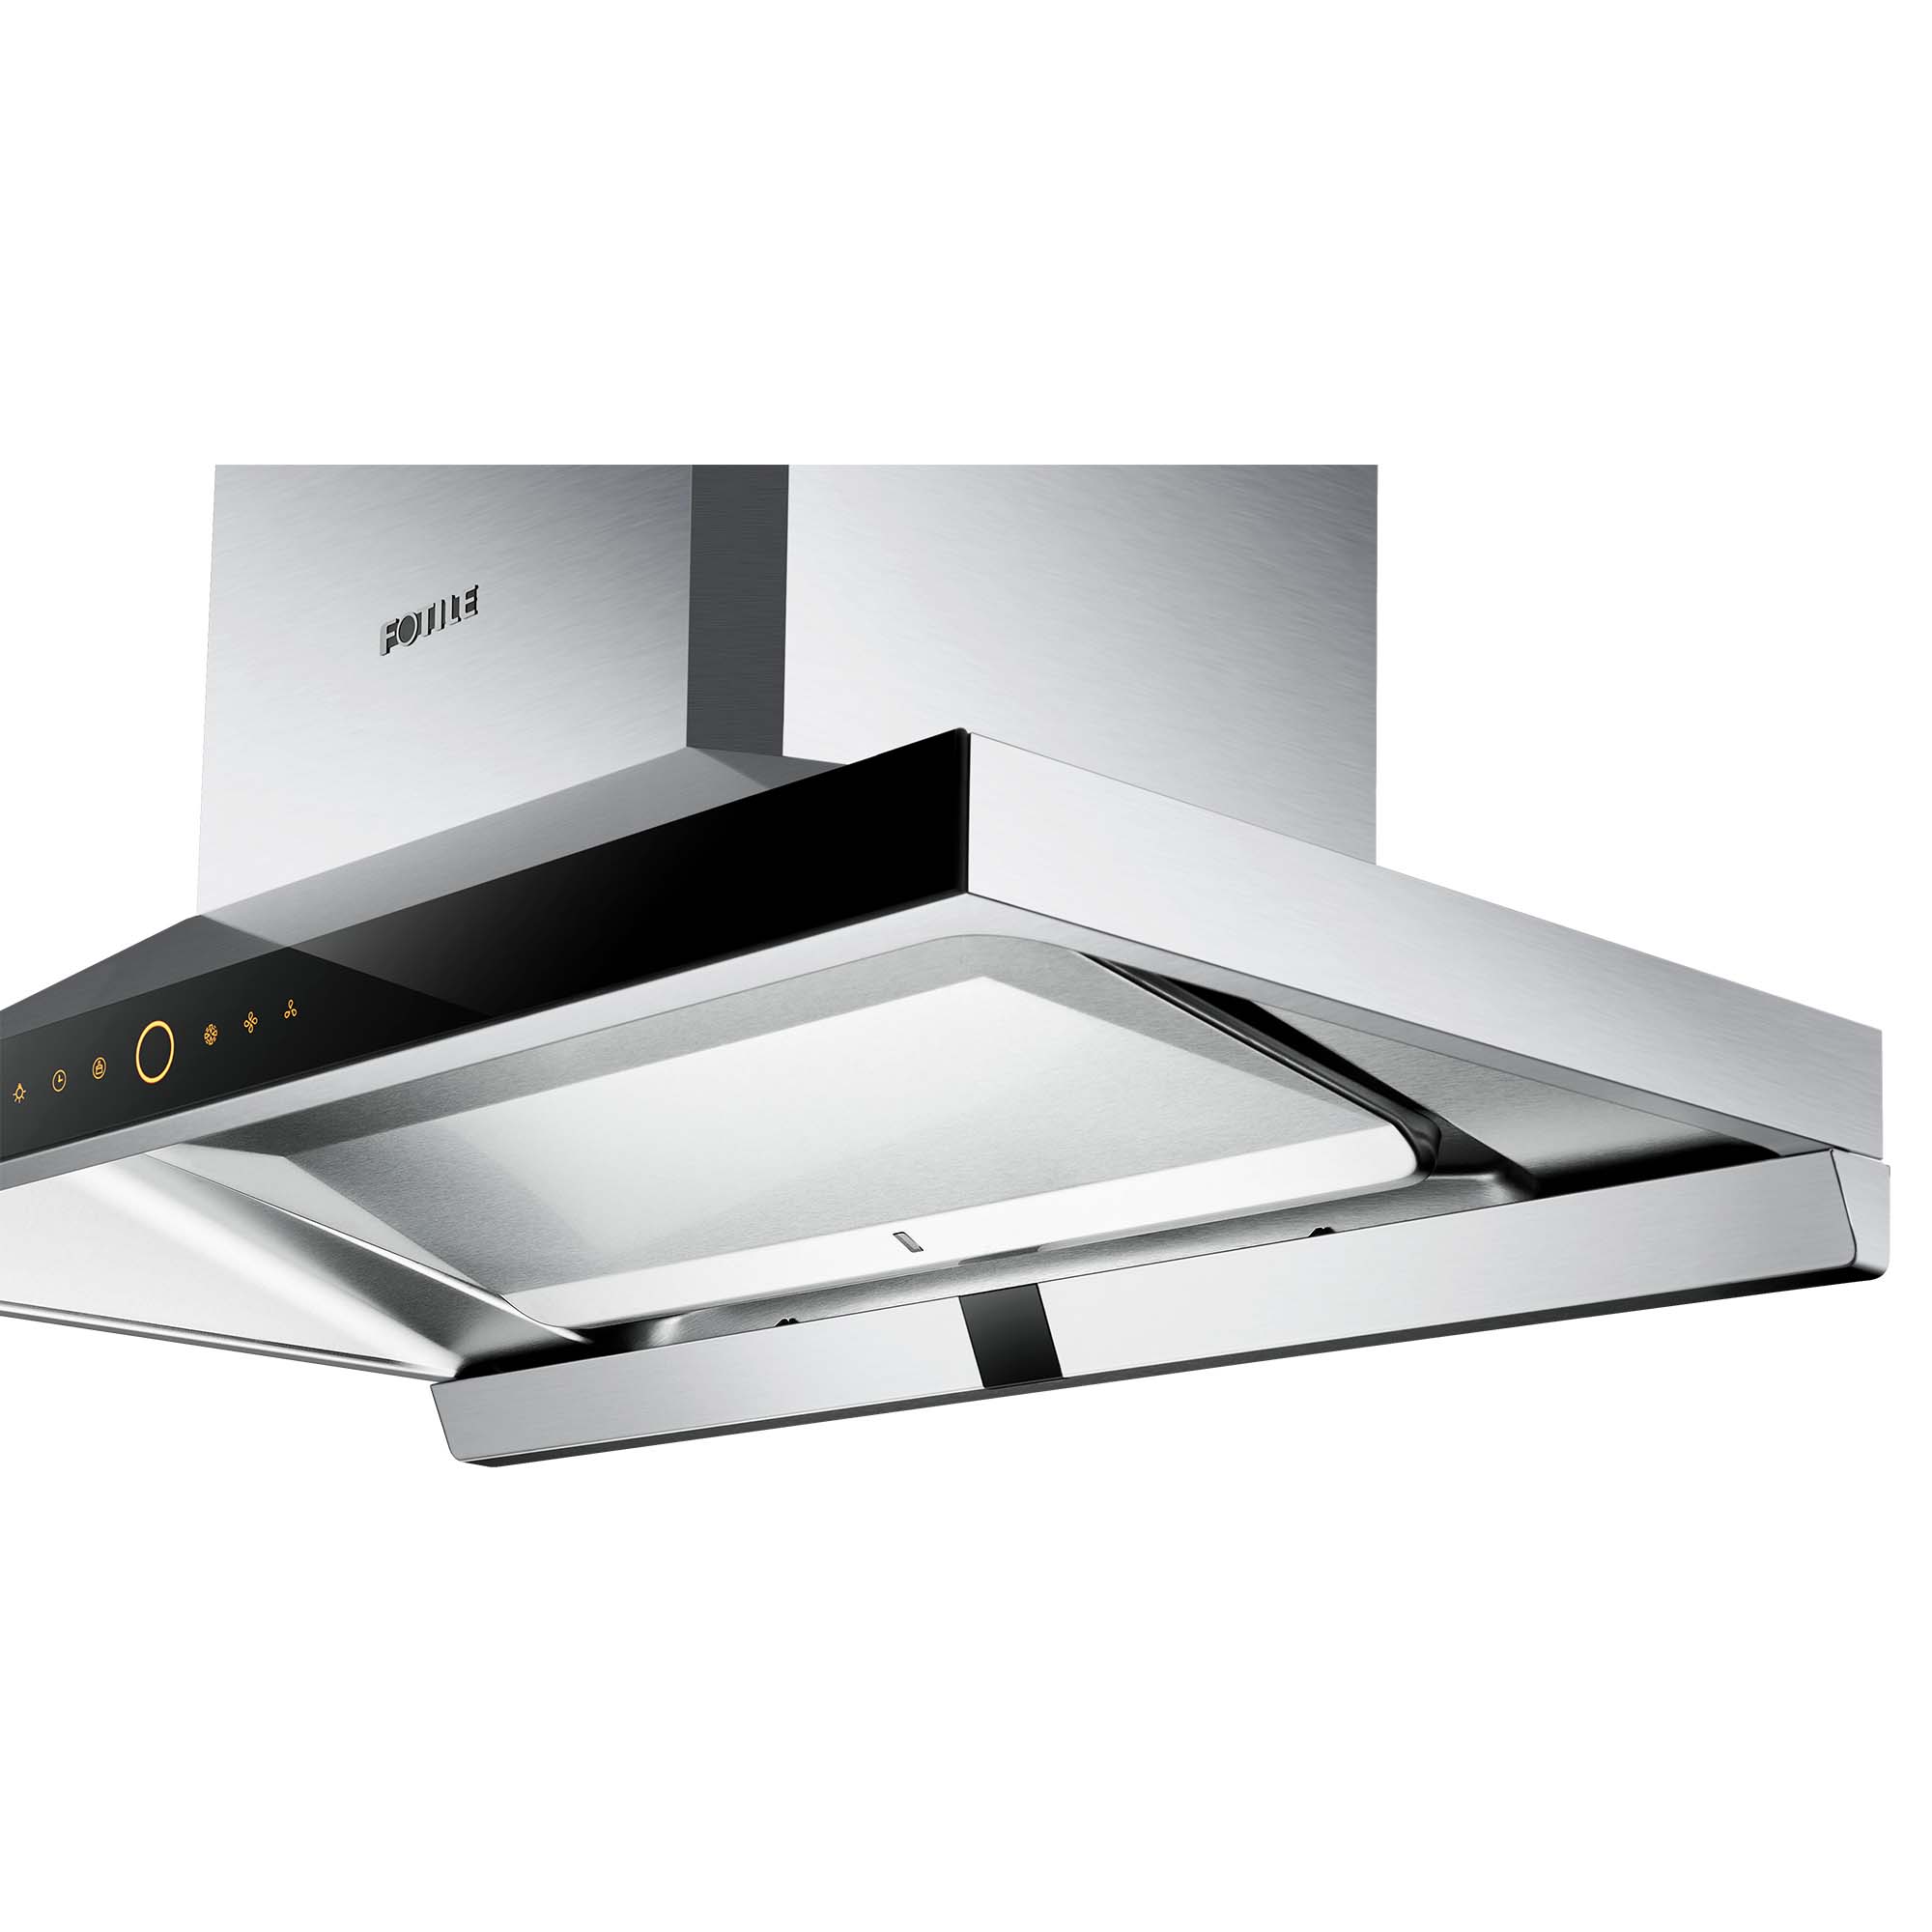 Fotile Perimeter Vent Series 36 in. 1000 CFM Wall Mount Range Hood with Touchscreen in Stainless Steel (EMS9026)